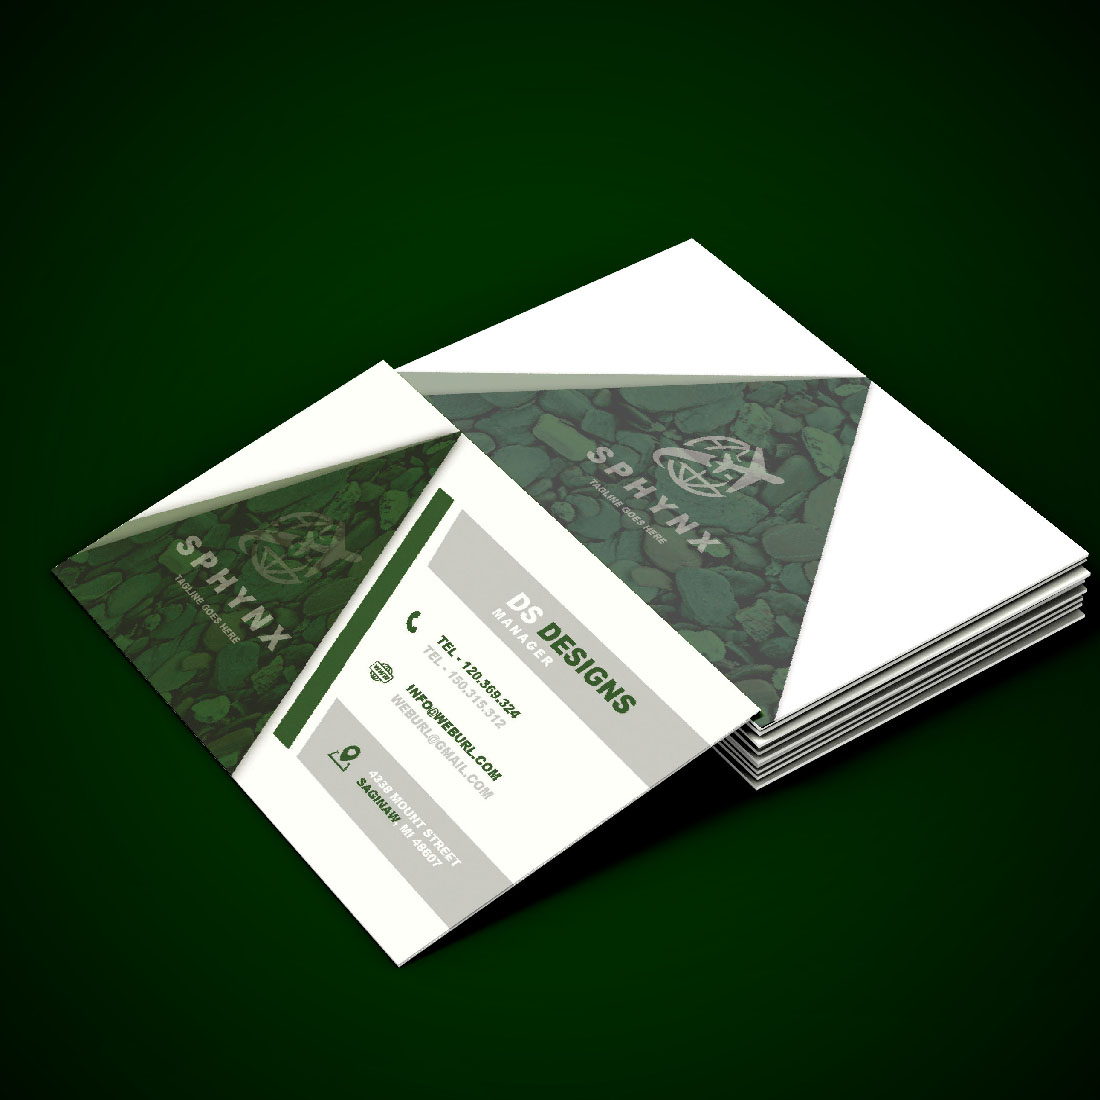 Creative Green Business Card Design cover image.